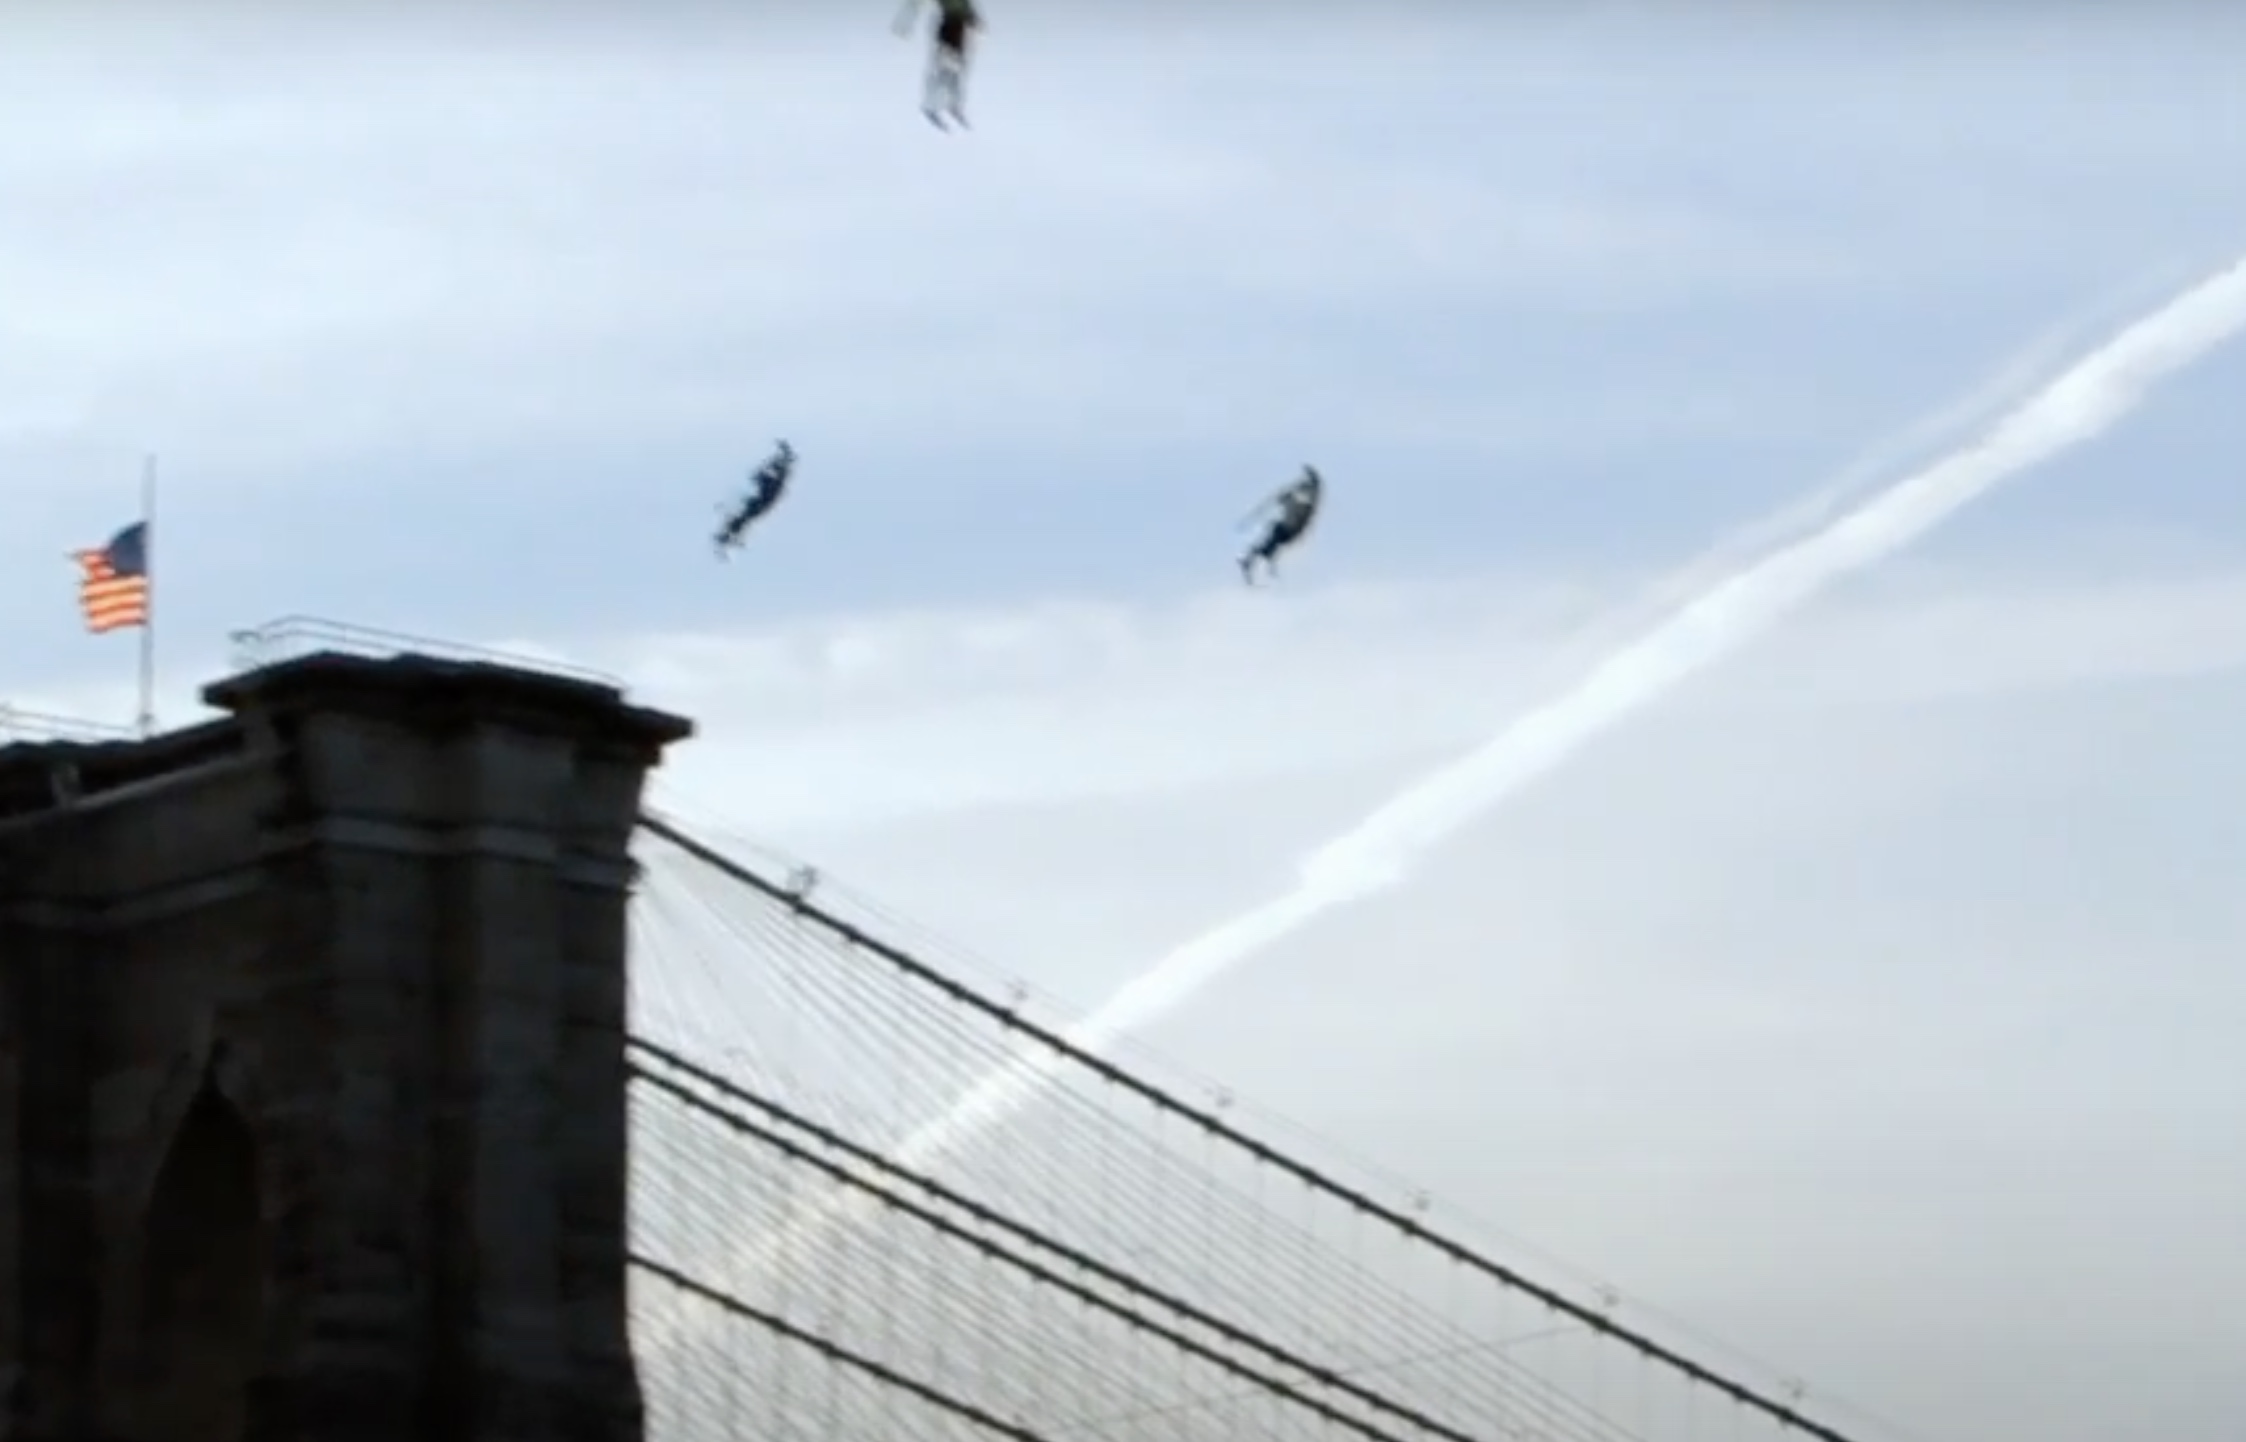 Must See: Flying People in NYC